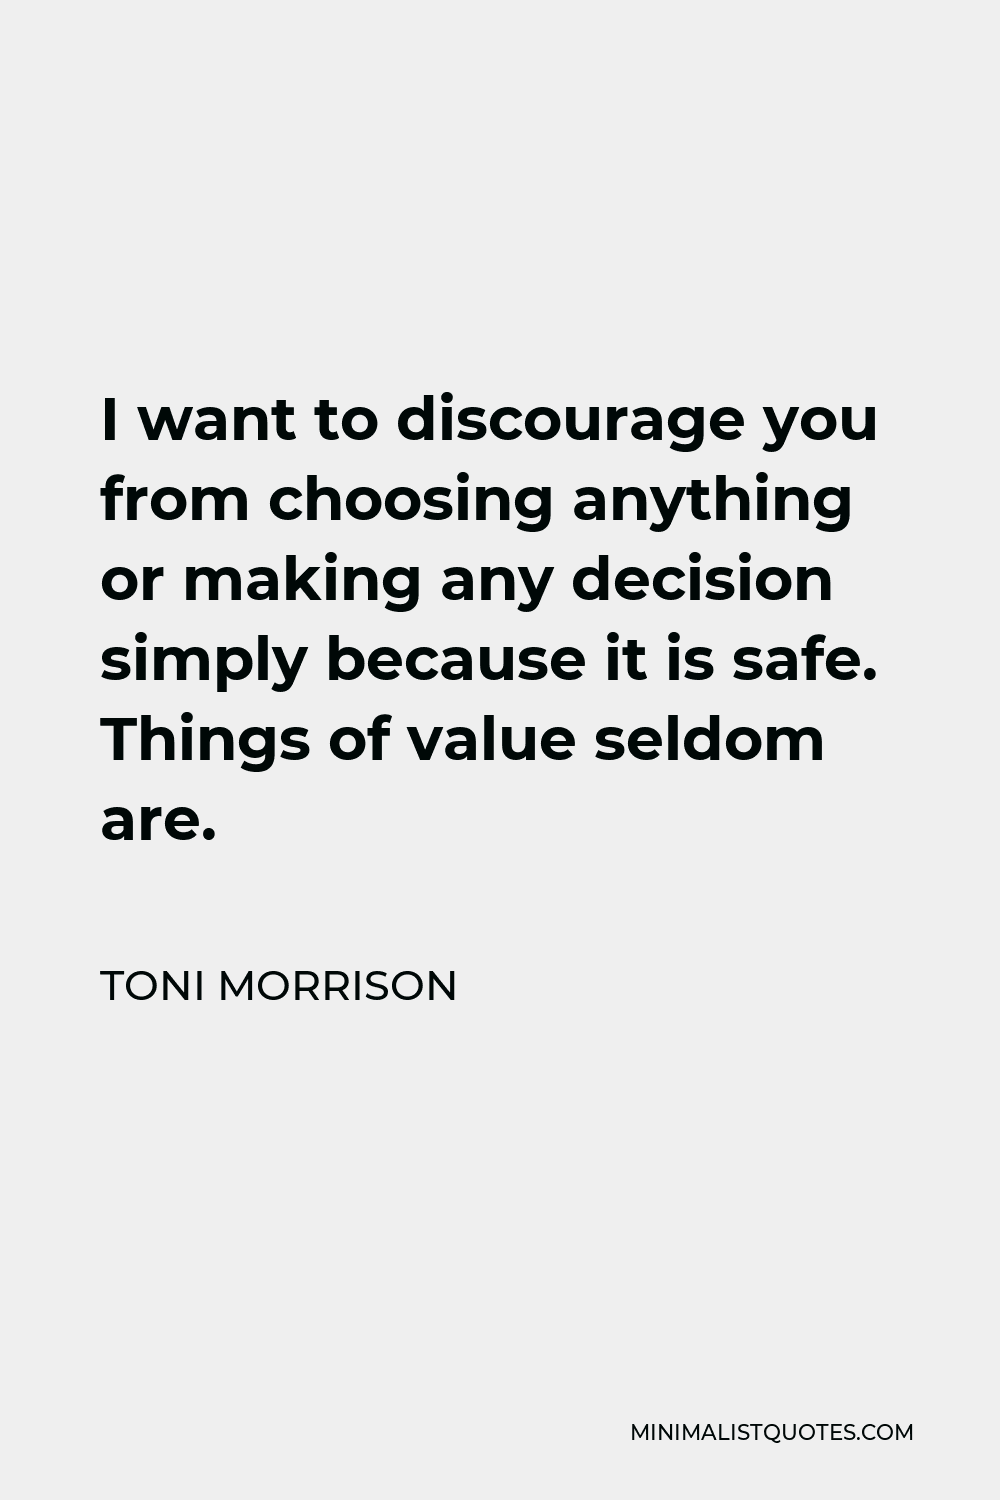 Toni Morrison Quote - I want to discourage you from choosing anything or making any decision simply because it is safe. Things of value seldom are.